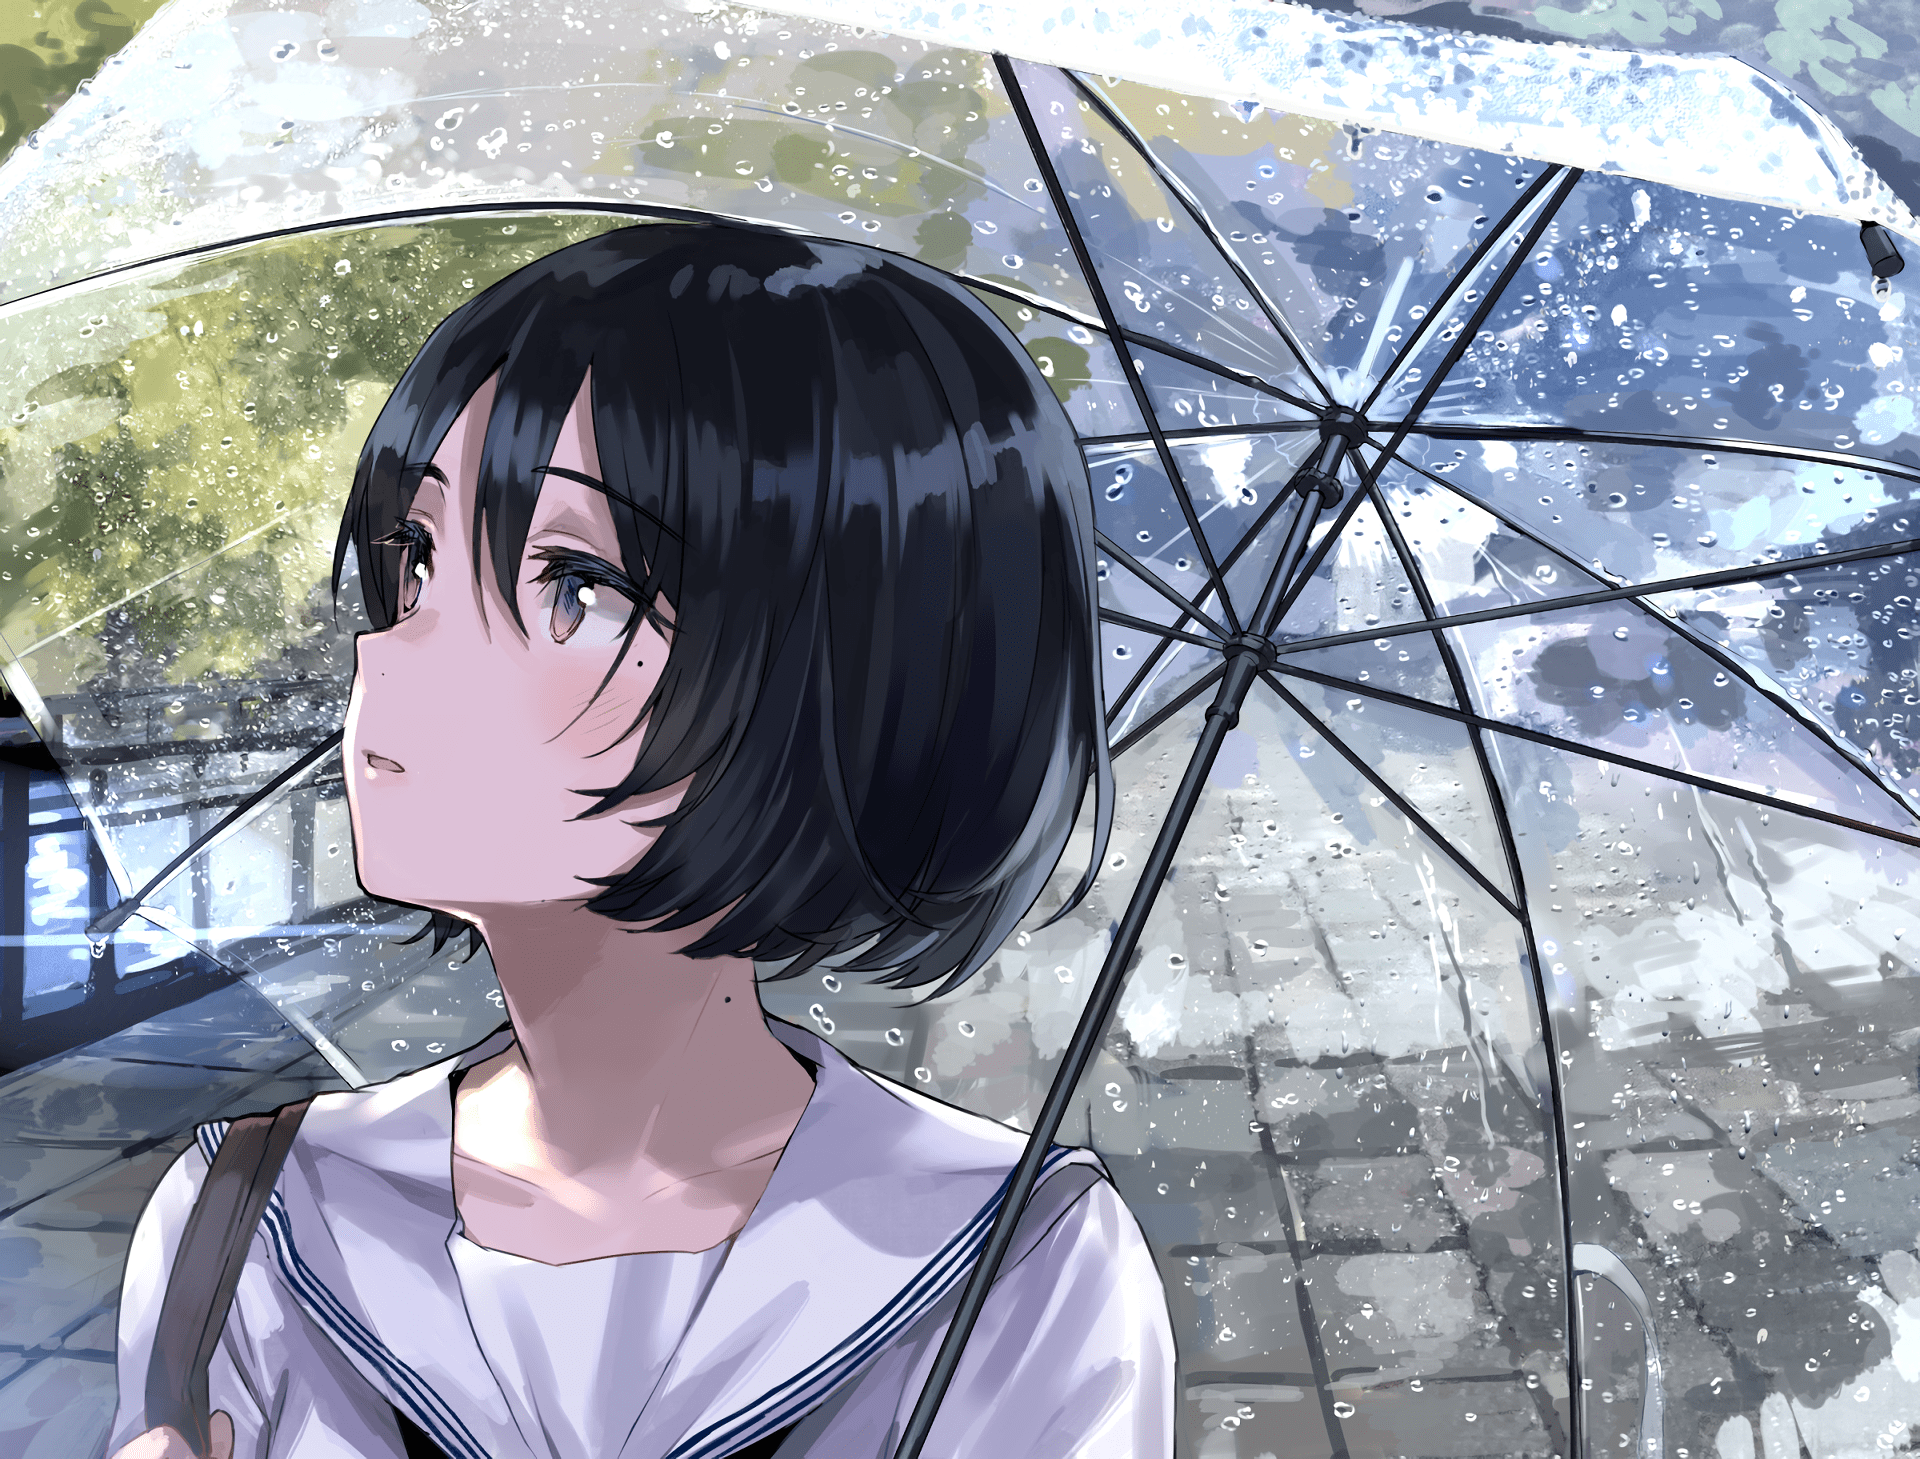 Looking For Anime Girls With Short Hair? Here Are 27+ Of The BEST!